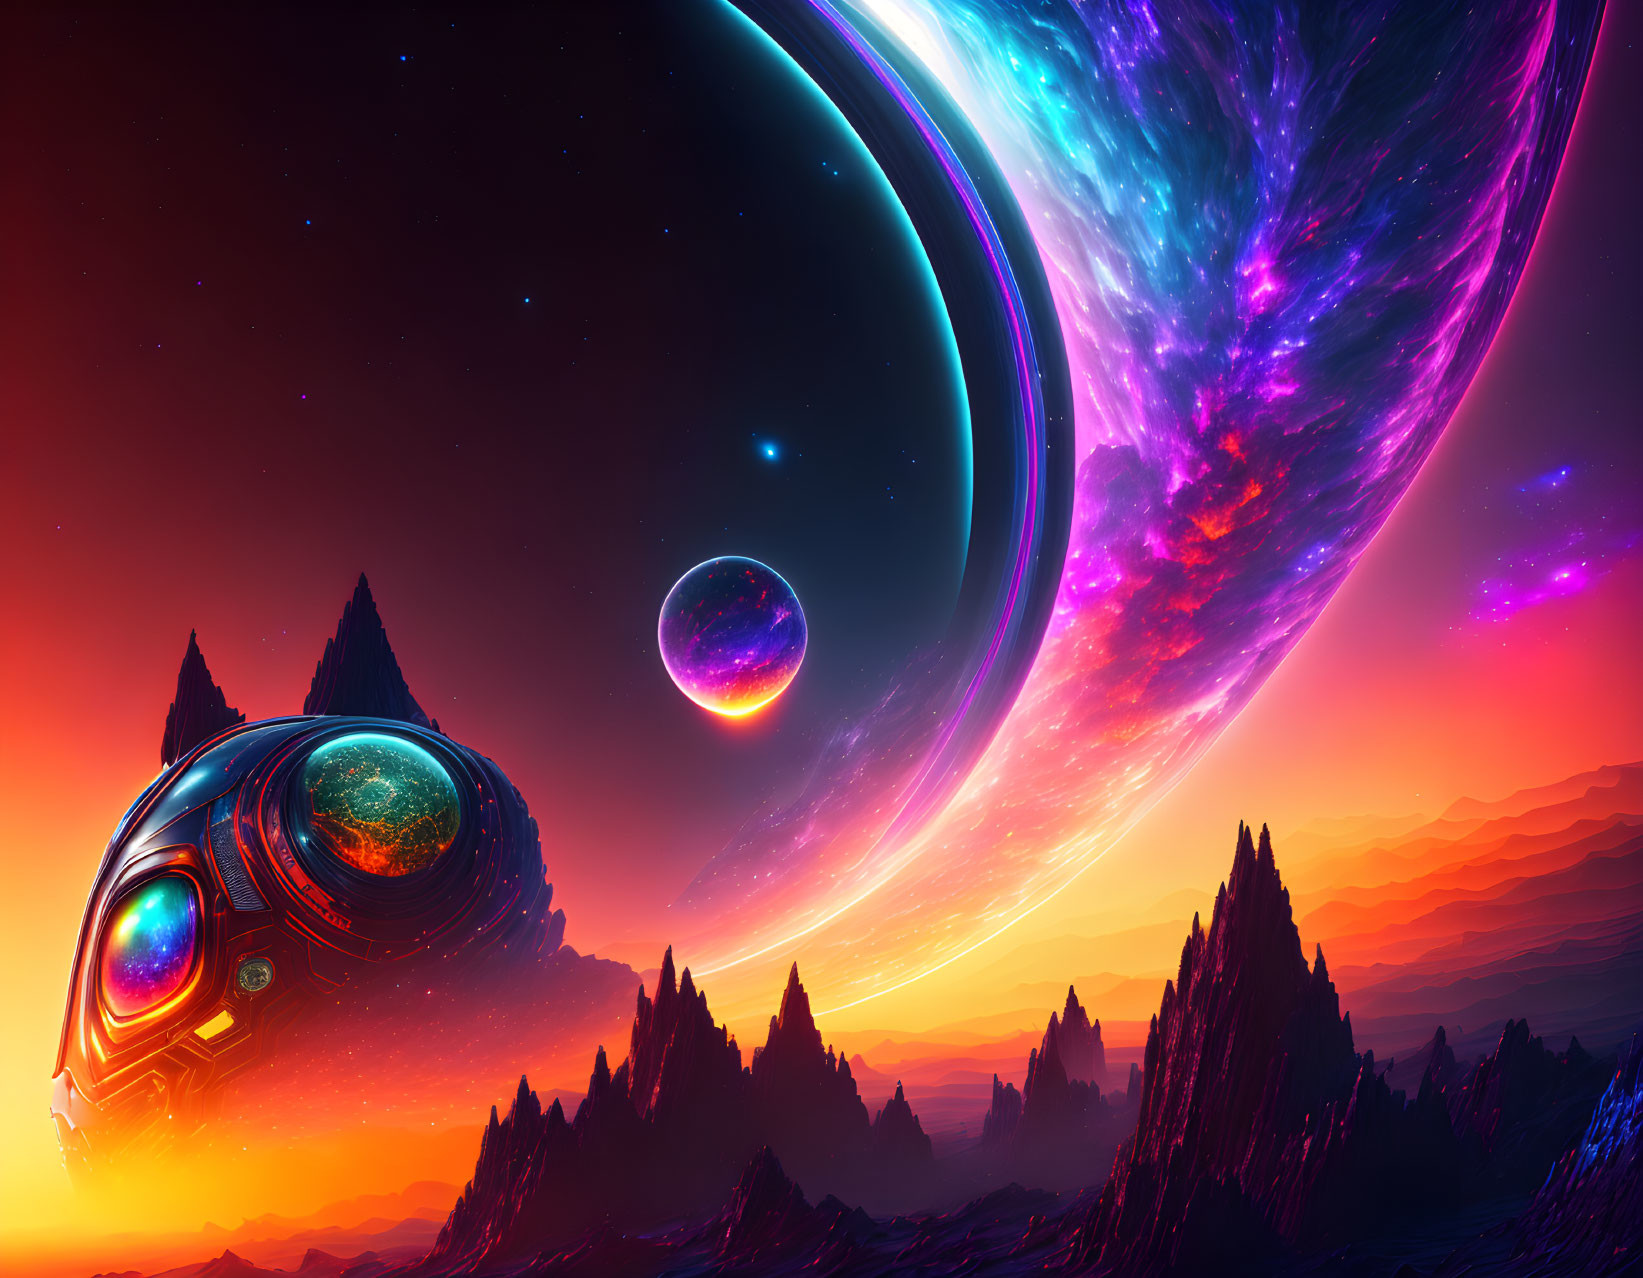 Colorful Alien World with Spaceship and Ringed Planets